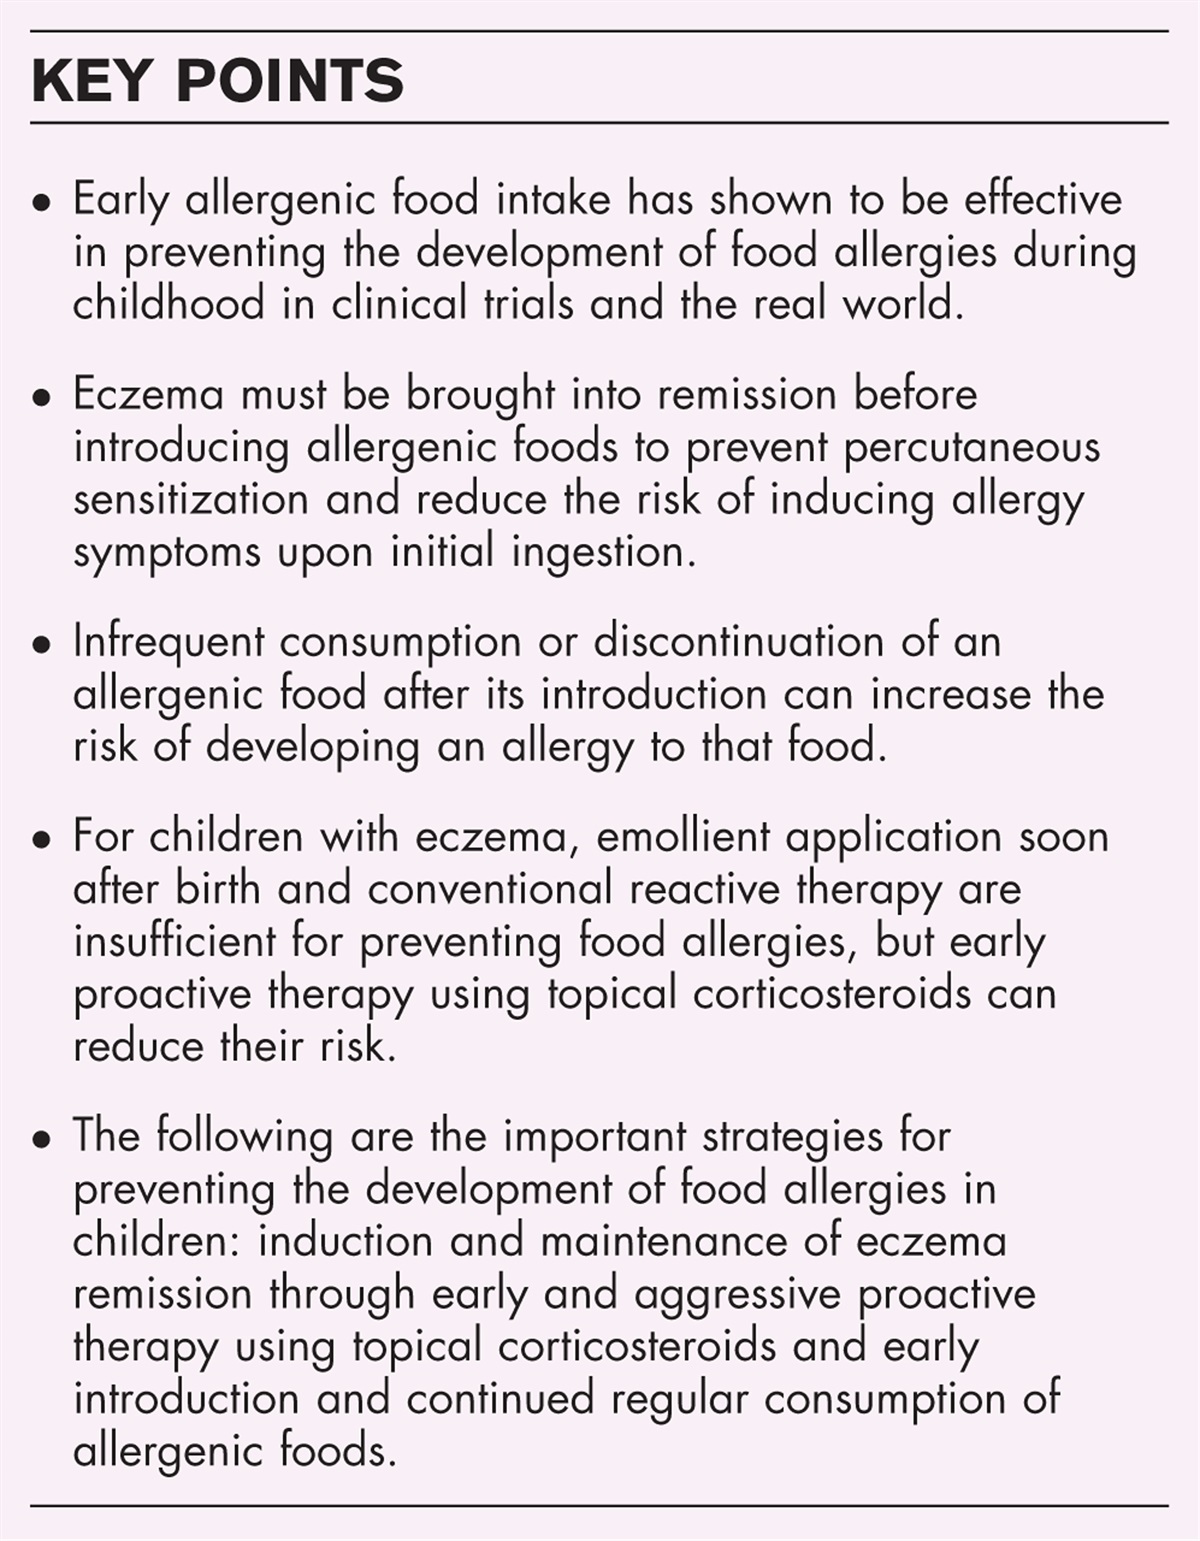 Regular consumption following early introduction of allergenic foods and aggressive treatment of eczema are necessary for preventing the development of food allergy in children